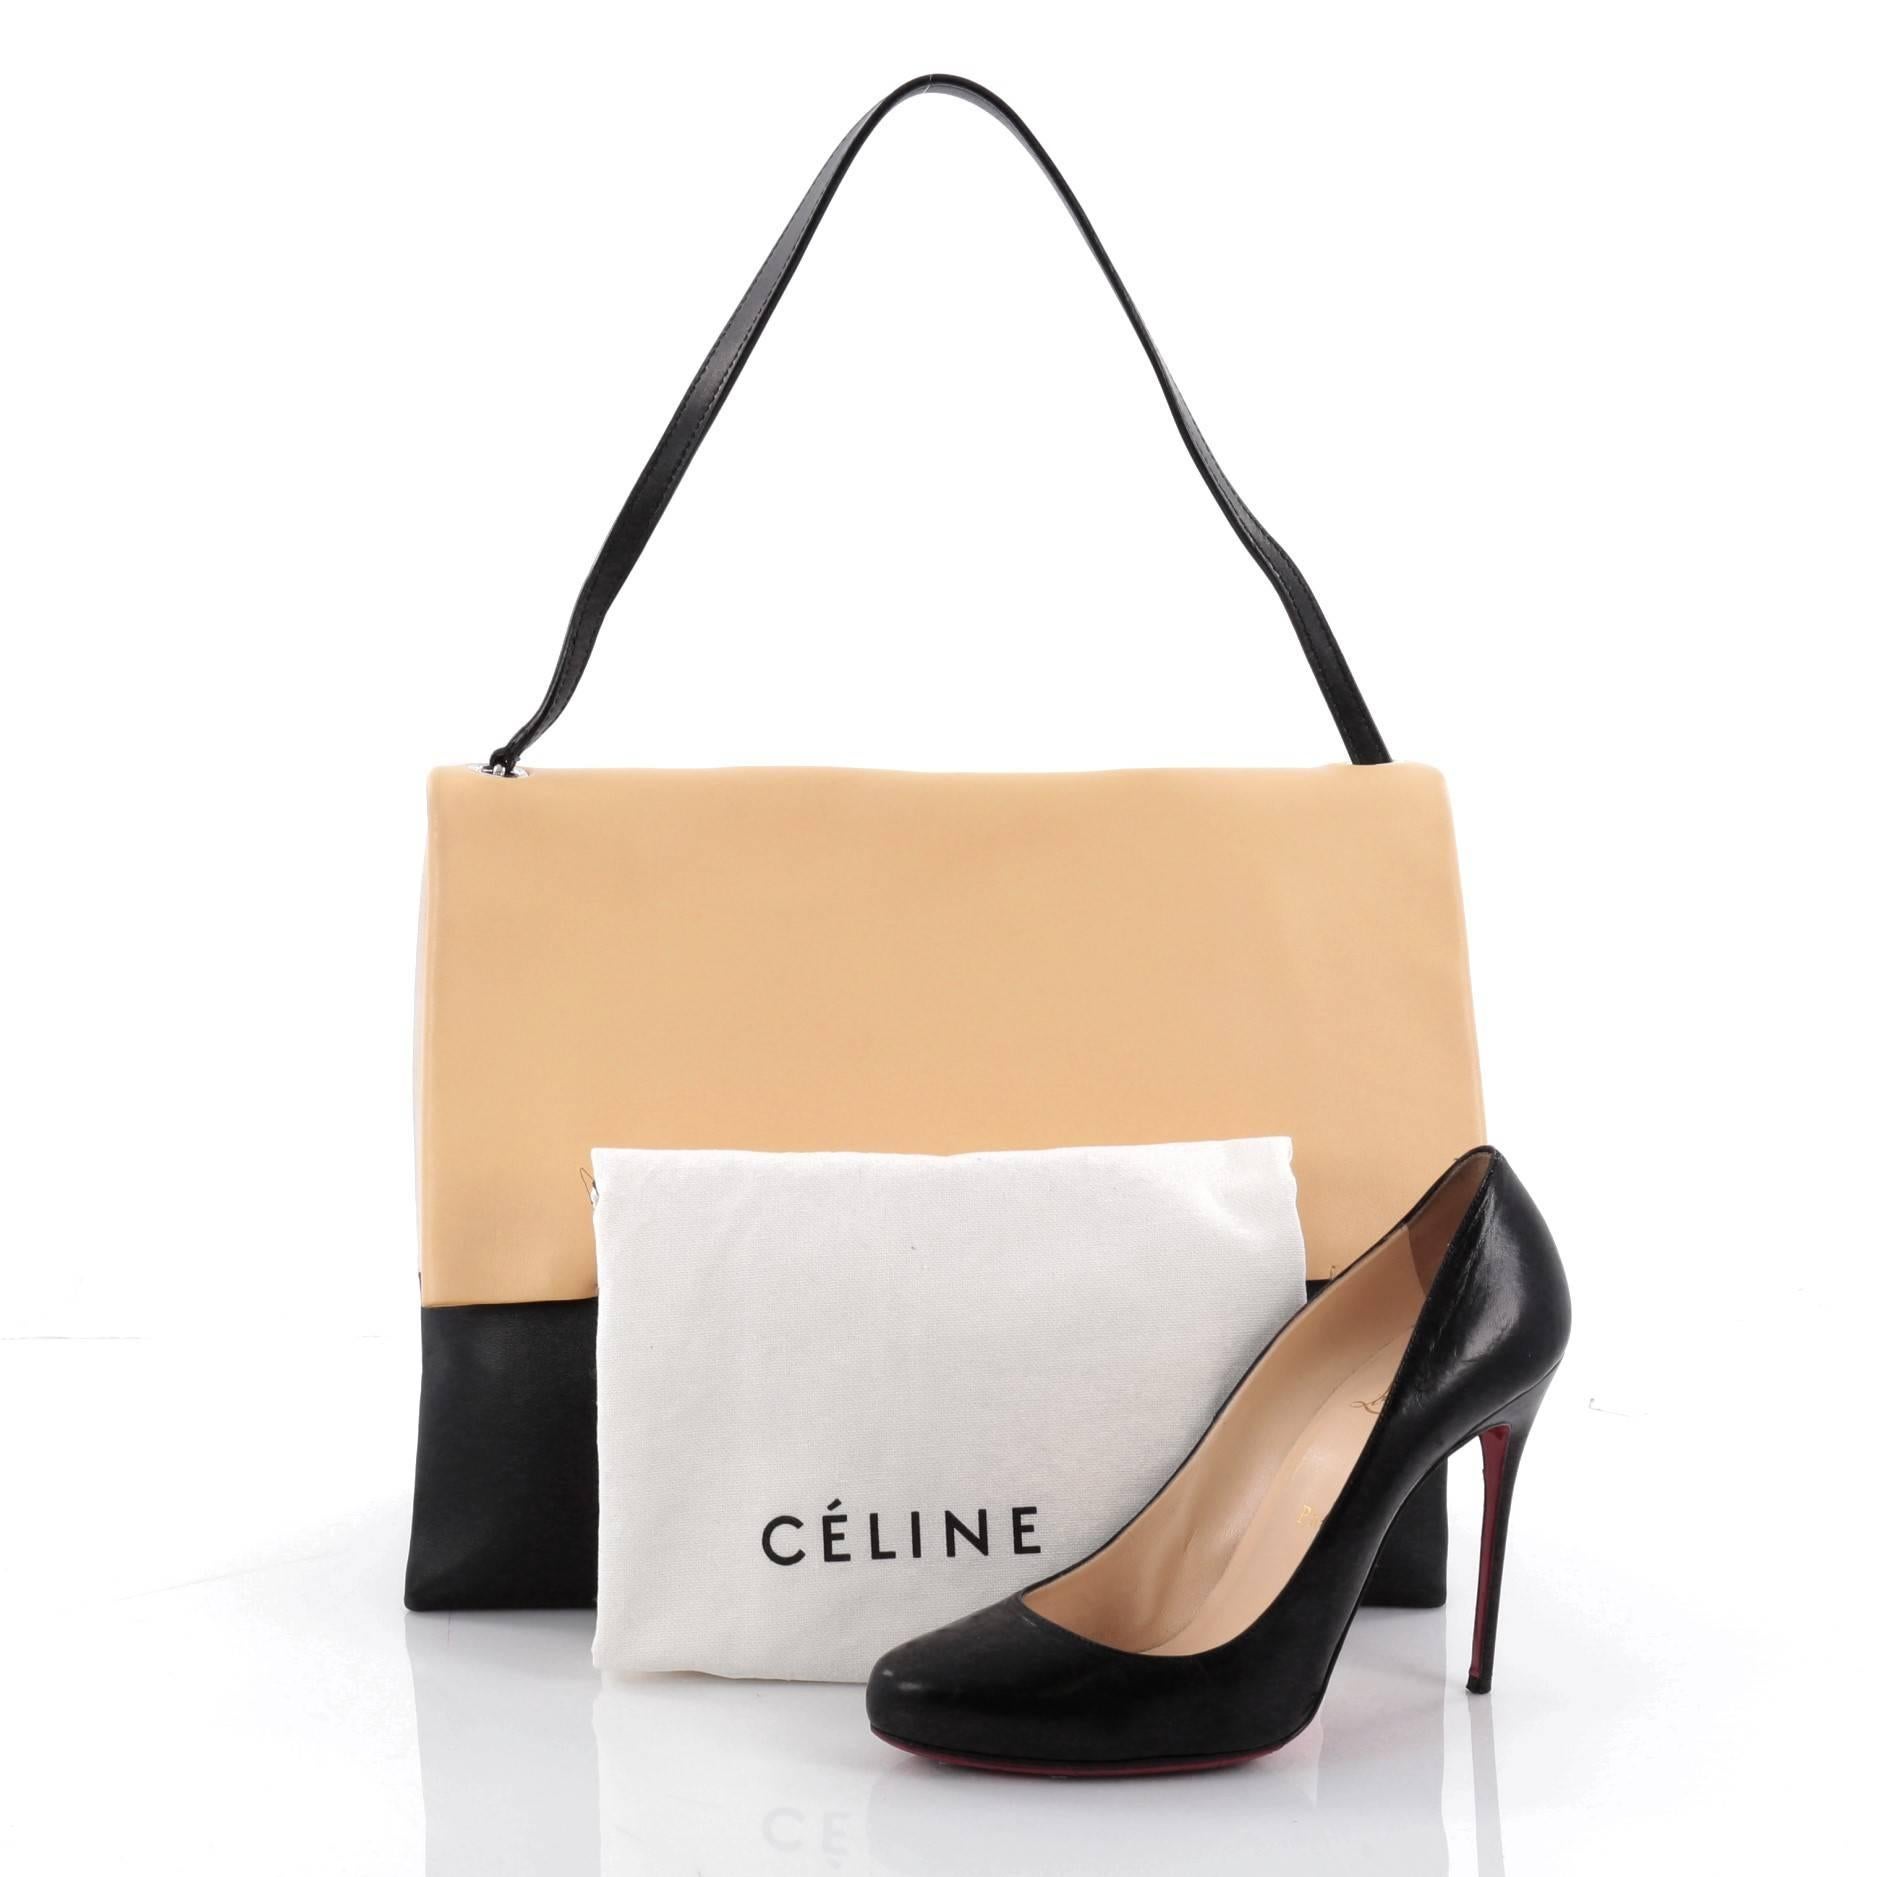 This authentic Celine All Soft Tote Leather is an understated look perfect for the modern woman. Crafted in creme, light yellow and black leather, this fresh, minimalist tote features a single leather shoulder strap, subtle stamped Celine logo and